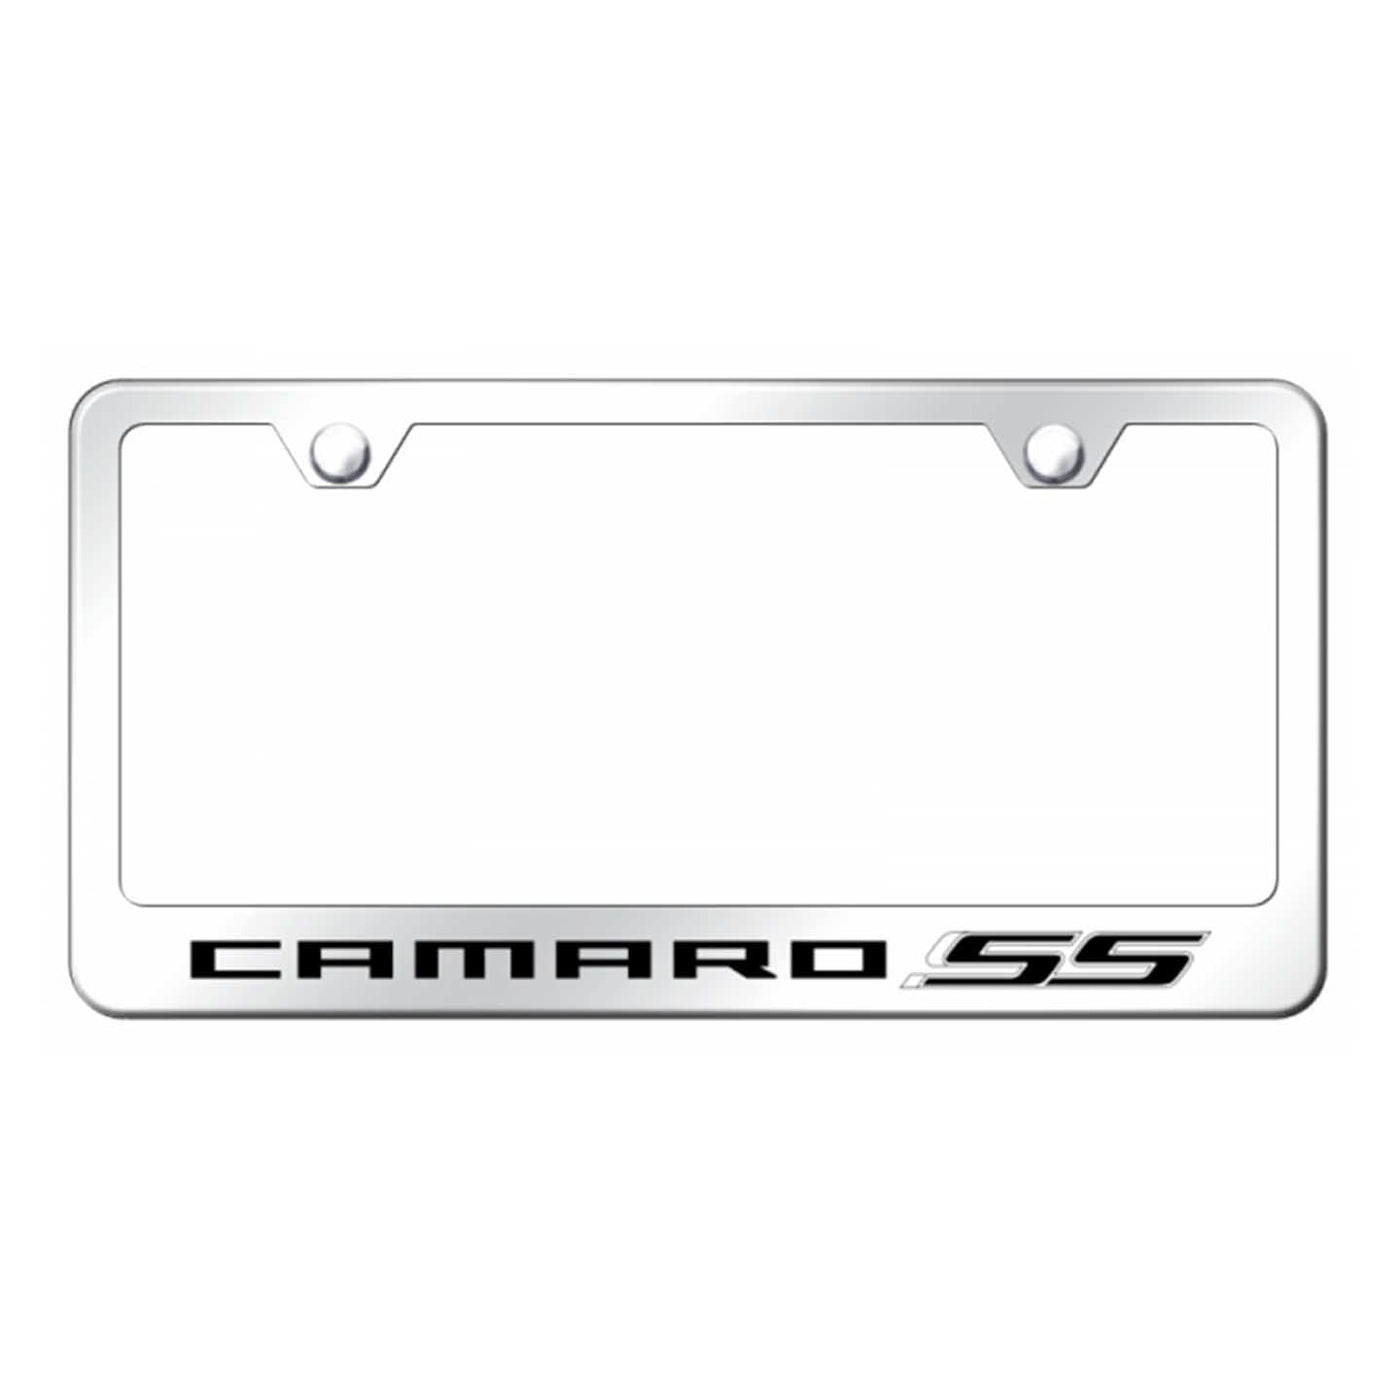 Camaro SS Stainless Steel Frame - Laser Etched Mirrored